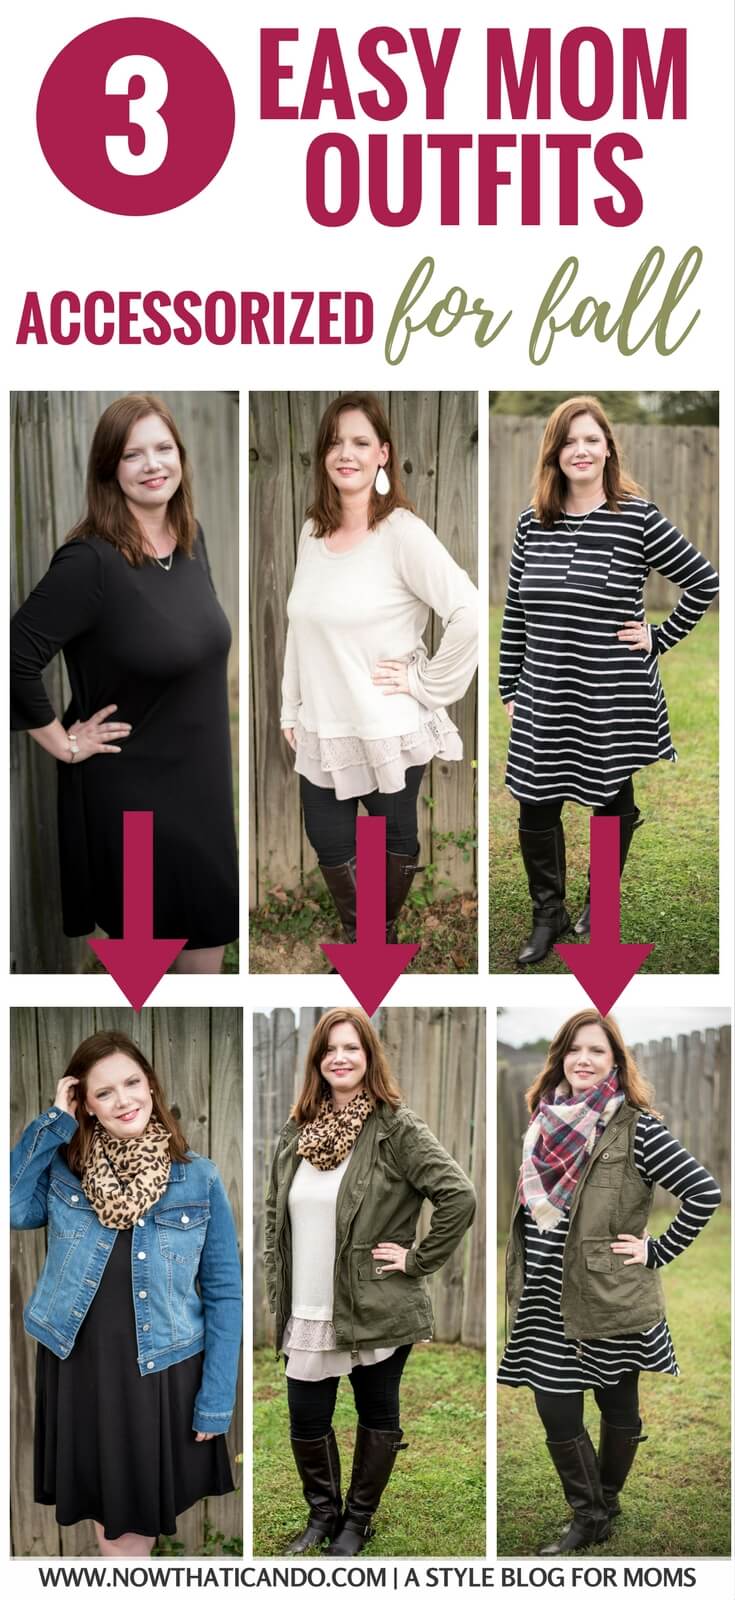 Today a Frump Fighter is sharing about some of her favorite clothing pieces and 3 ways to style them! All three outfits are based on the Year Round Wardrobe Outfit Guide that helps you simplify your wardrobe and make getting dressed FUN and EASY! #fashion #momlife #outfits #fallfashion #fall